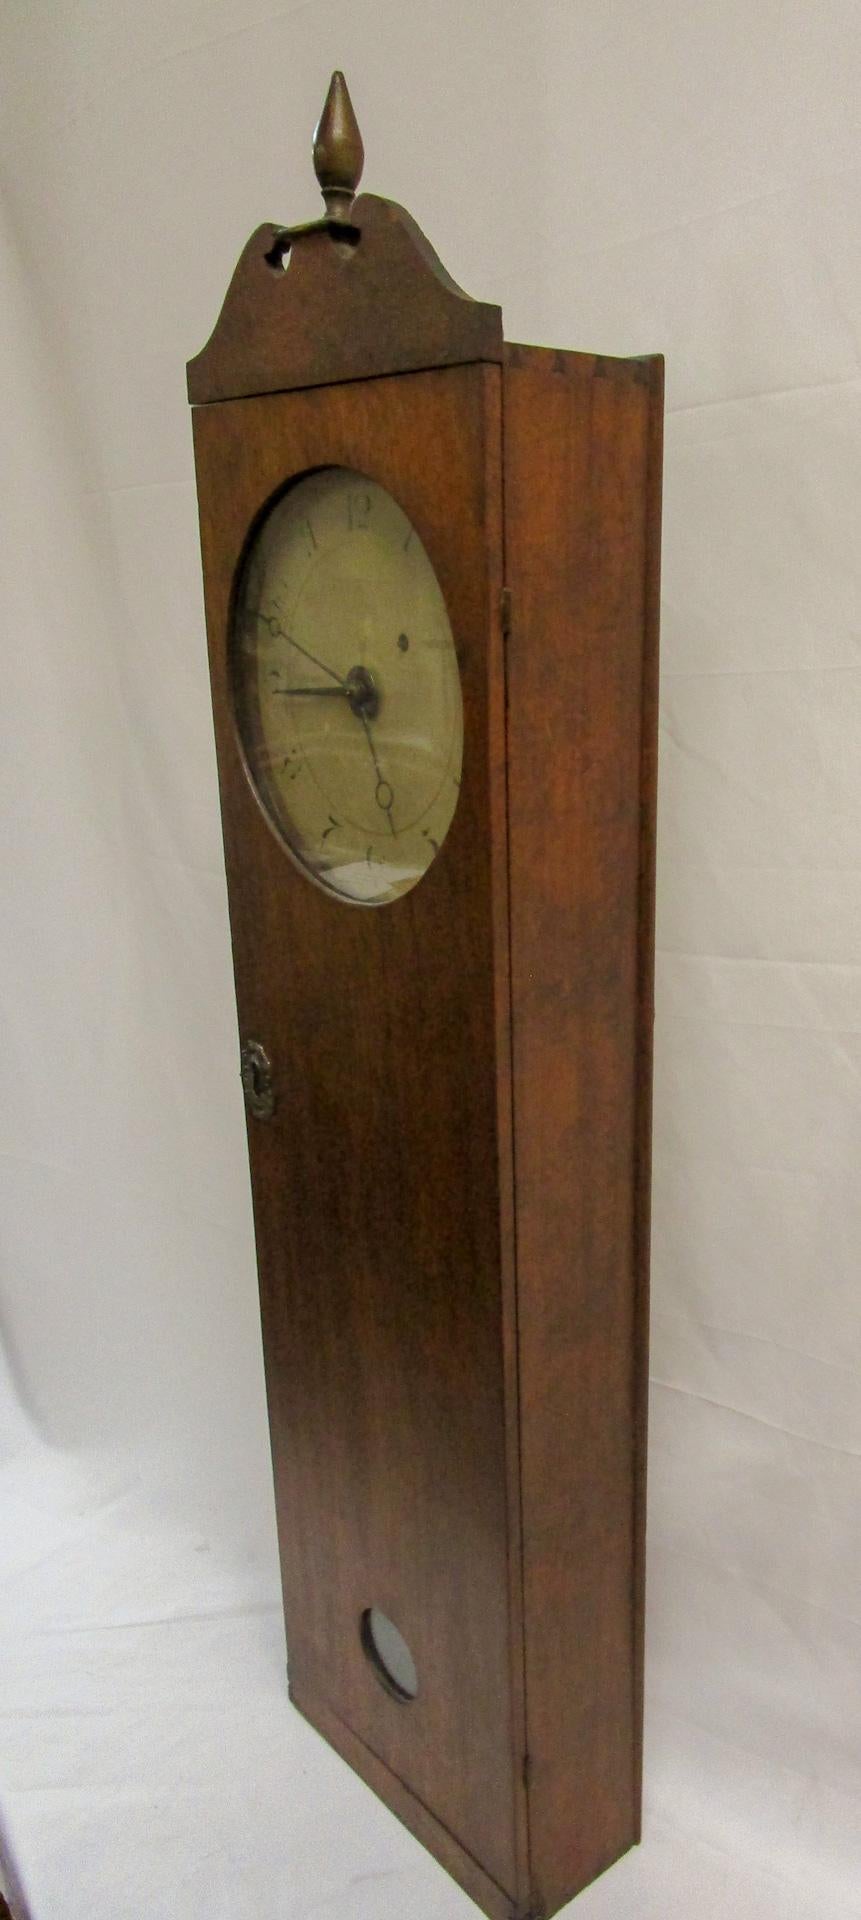 This rare mahogany Coffin Clock was made by Elnathan Taber of Roxbury, Massachusetts, c. 1810. Features include-
Case: arched swan neck pediment with turned wooden
finial over full-length hinged door with glazed dial and
pendulum aperture, and